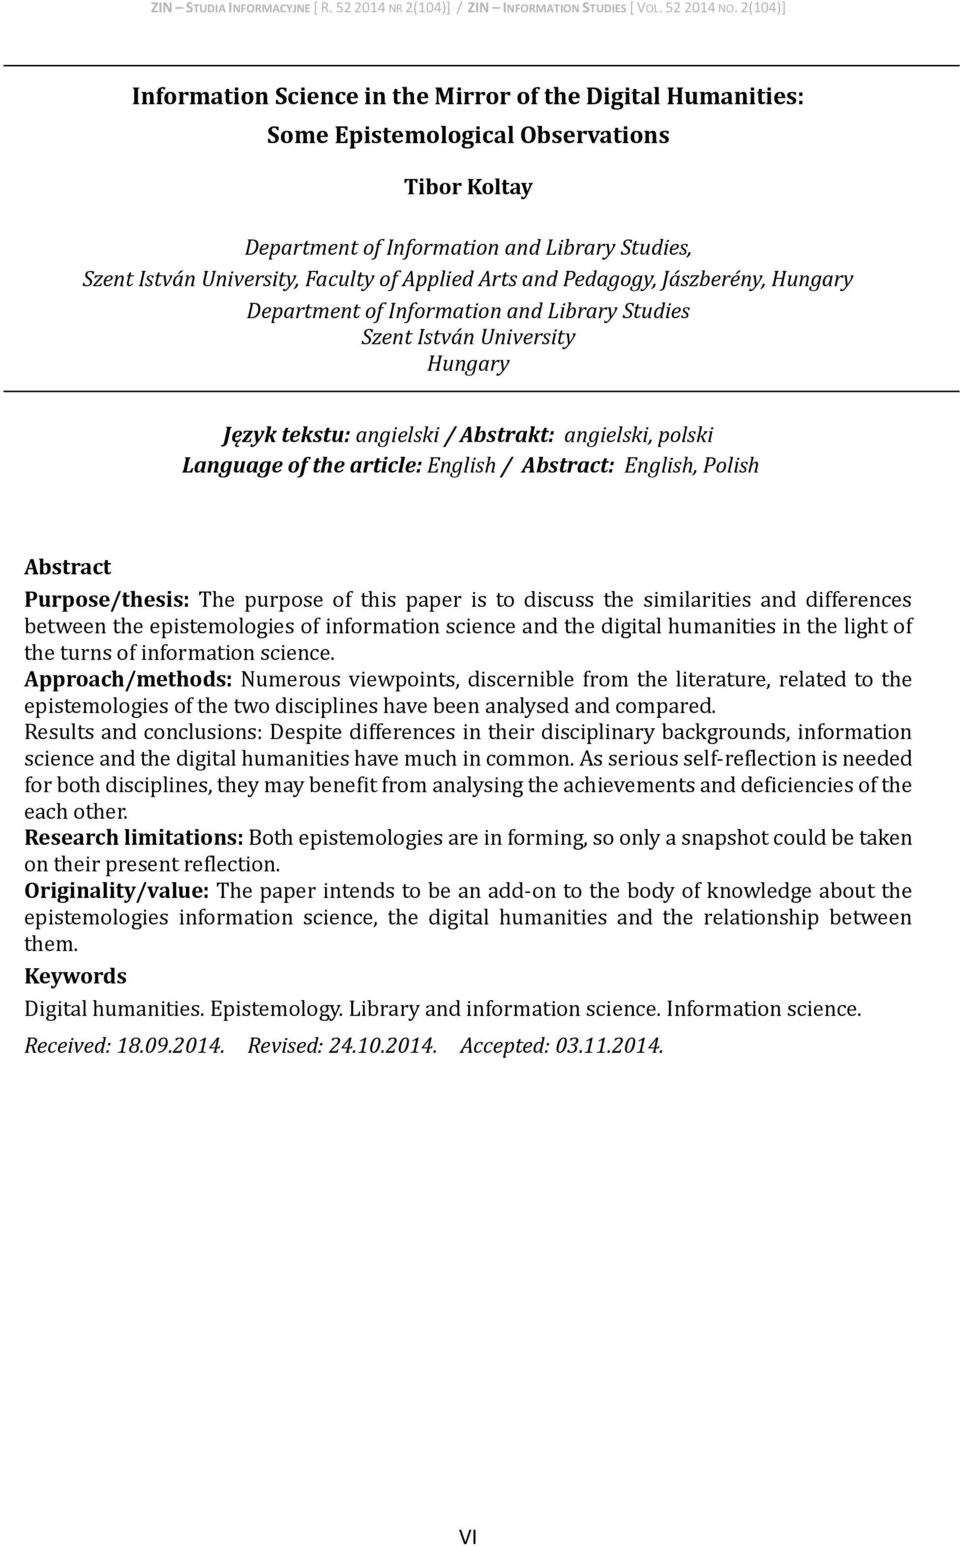 English / Abstract: English, Polish Abstract Purpose/thesis: The purpose of this paper is to discuss the similarities and differences between the epistemologies of information science and the digital